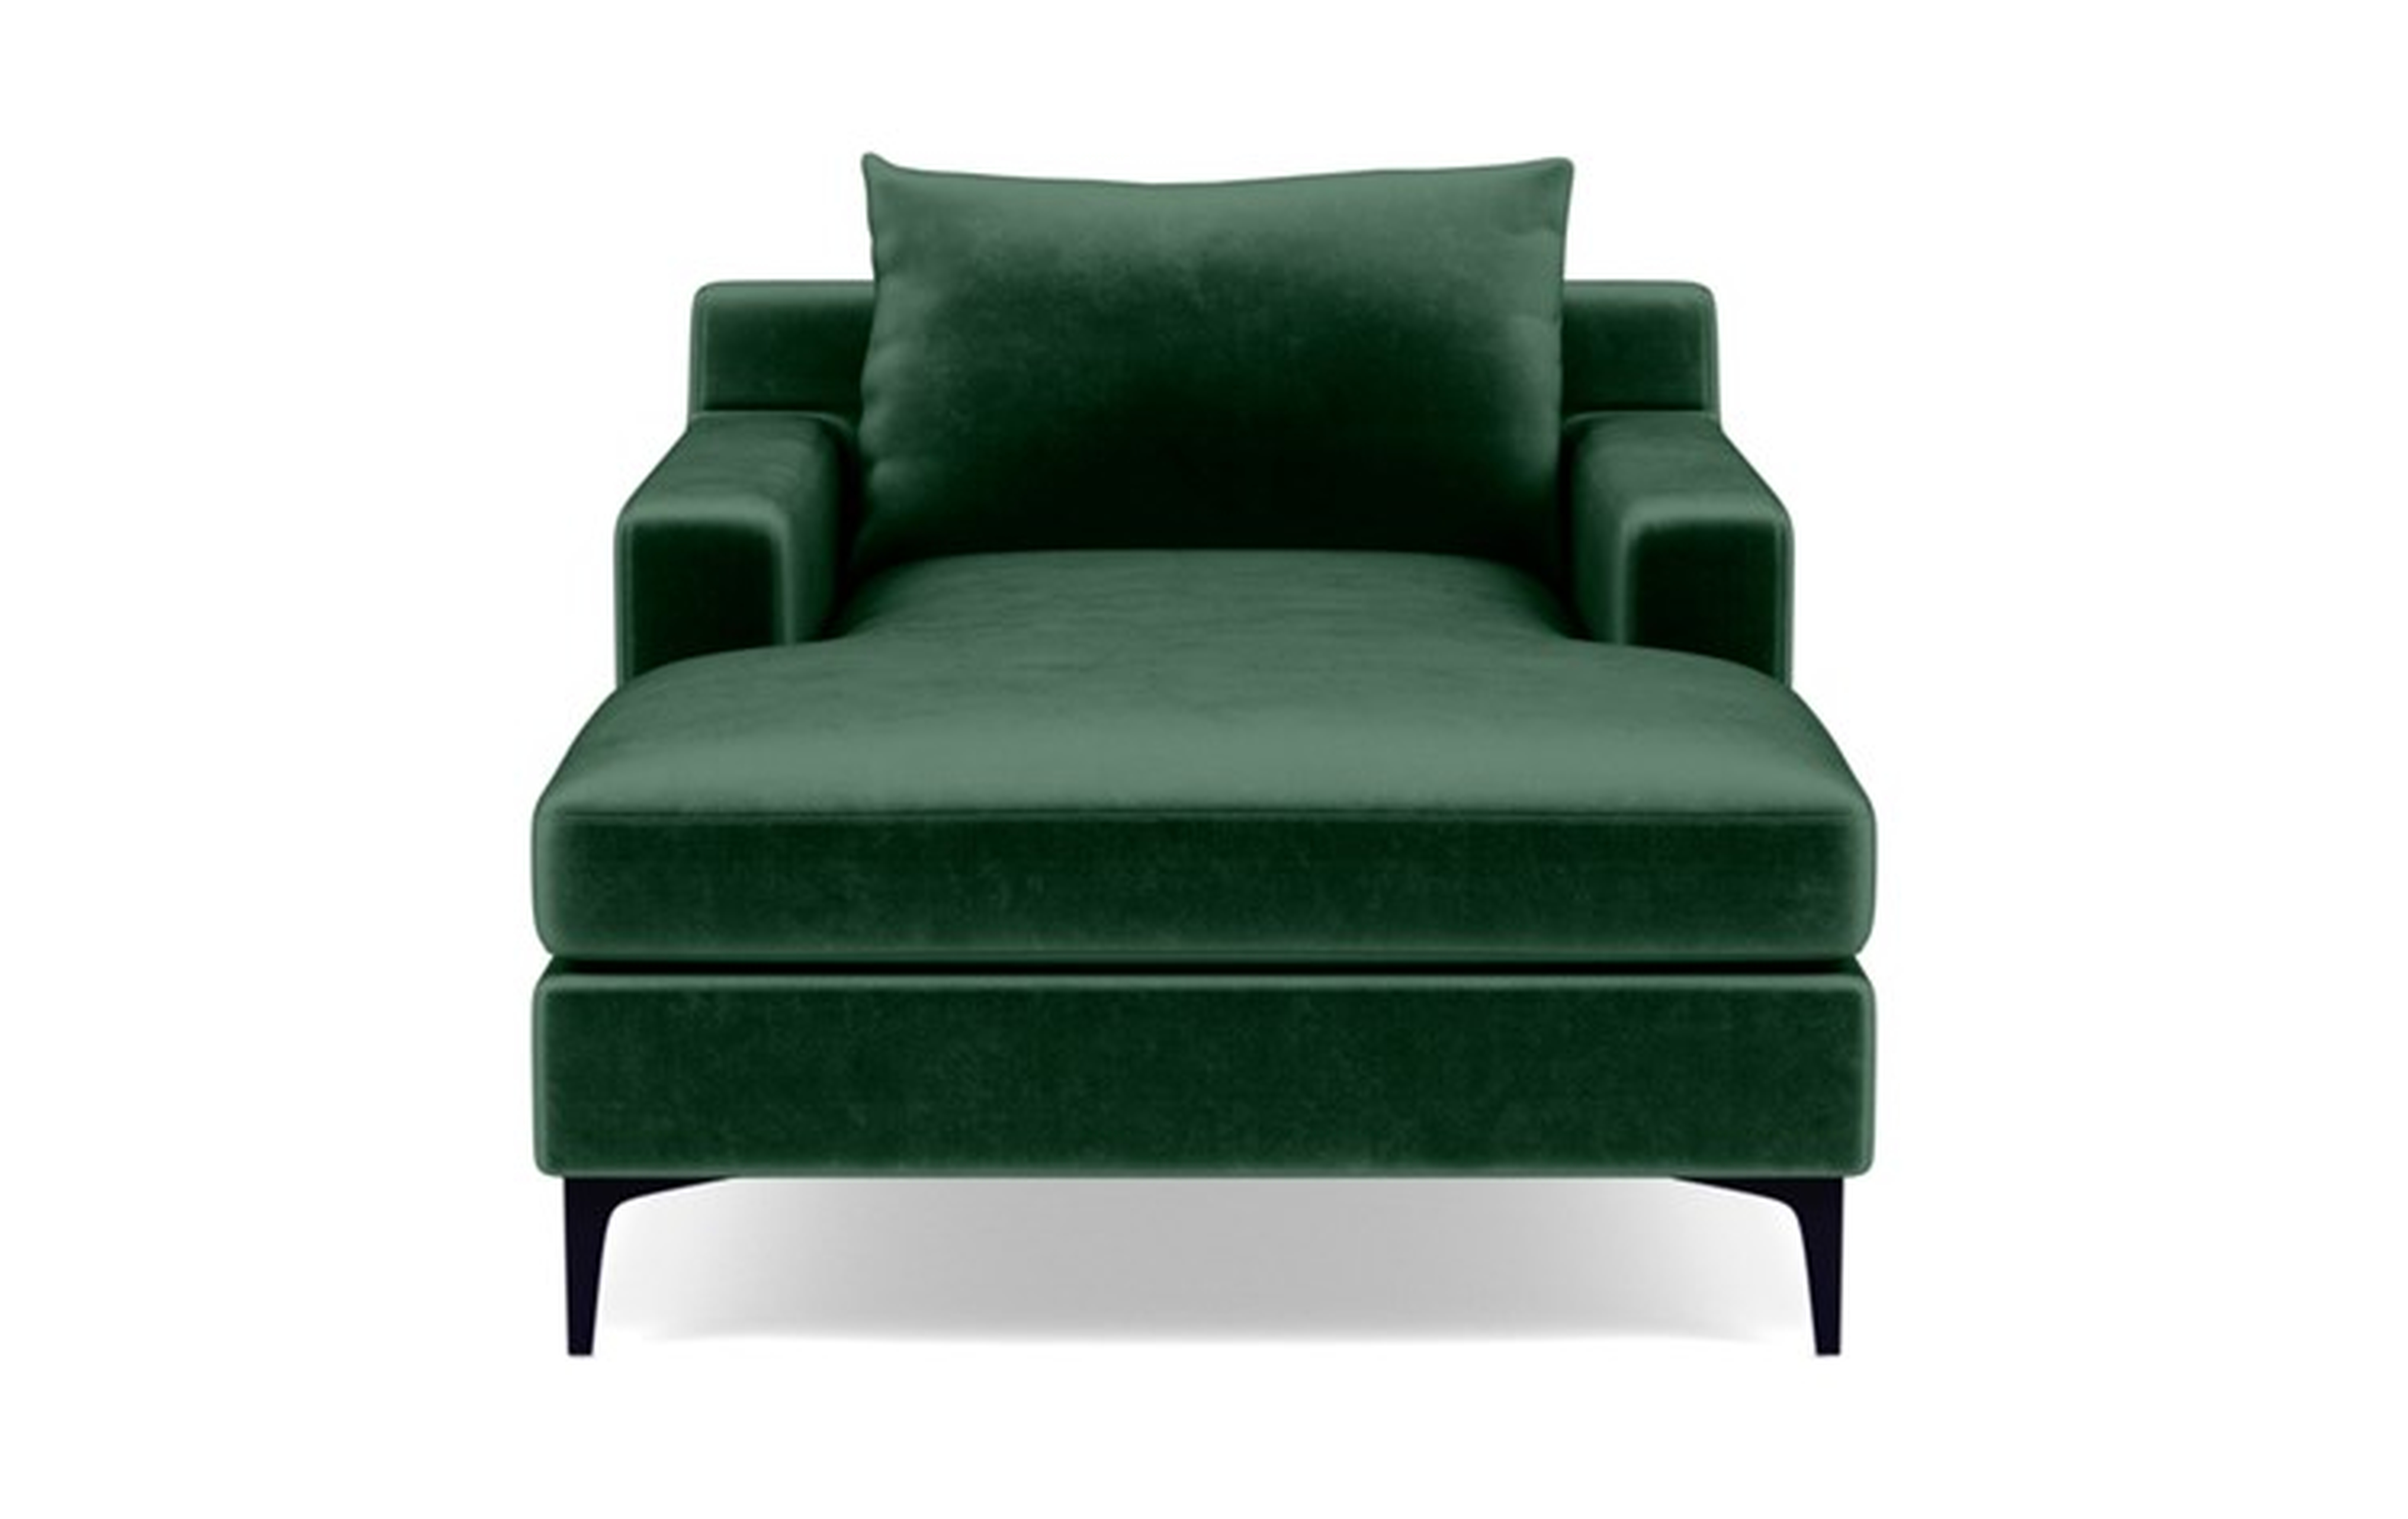 Sloan Chaise Chaise Lounge with Green Malachite Fabric, double down blend cushions, and Matte White legs - Interior Define